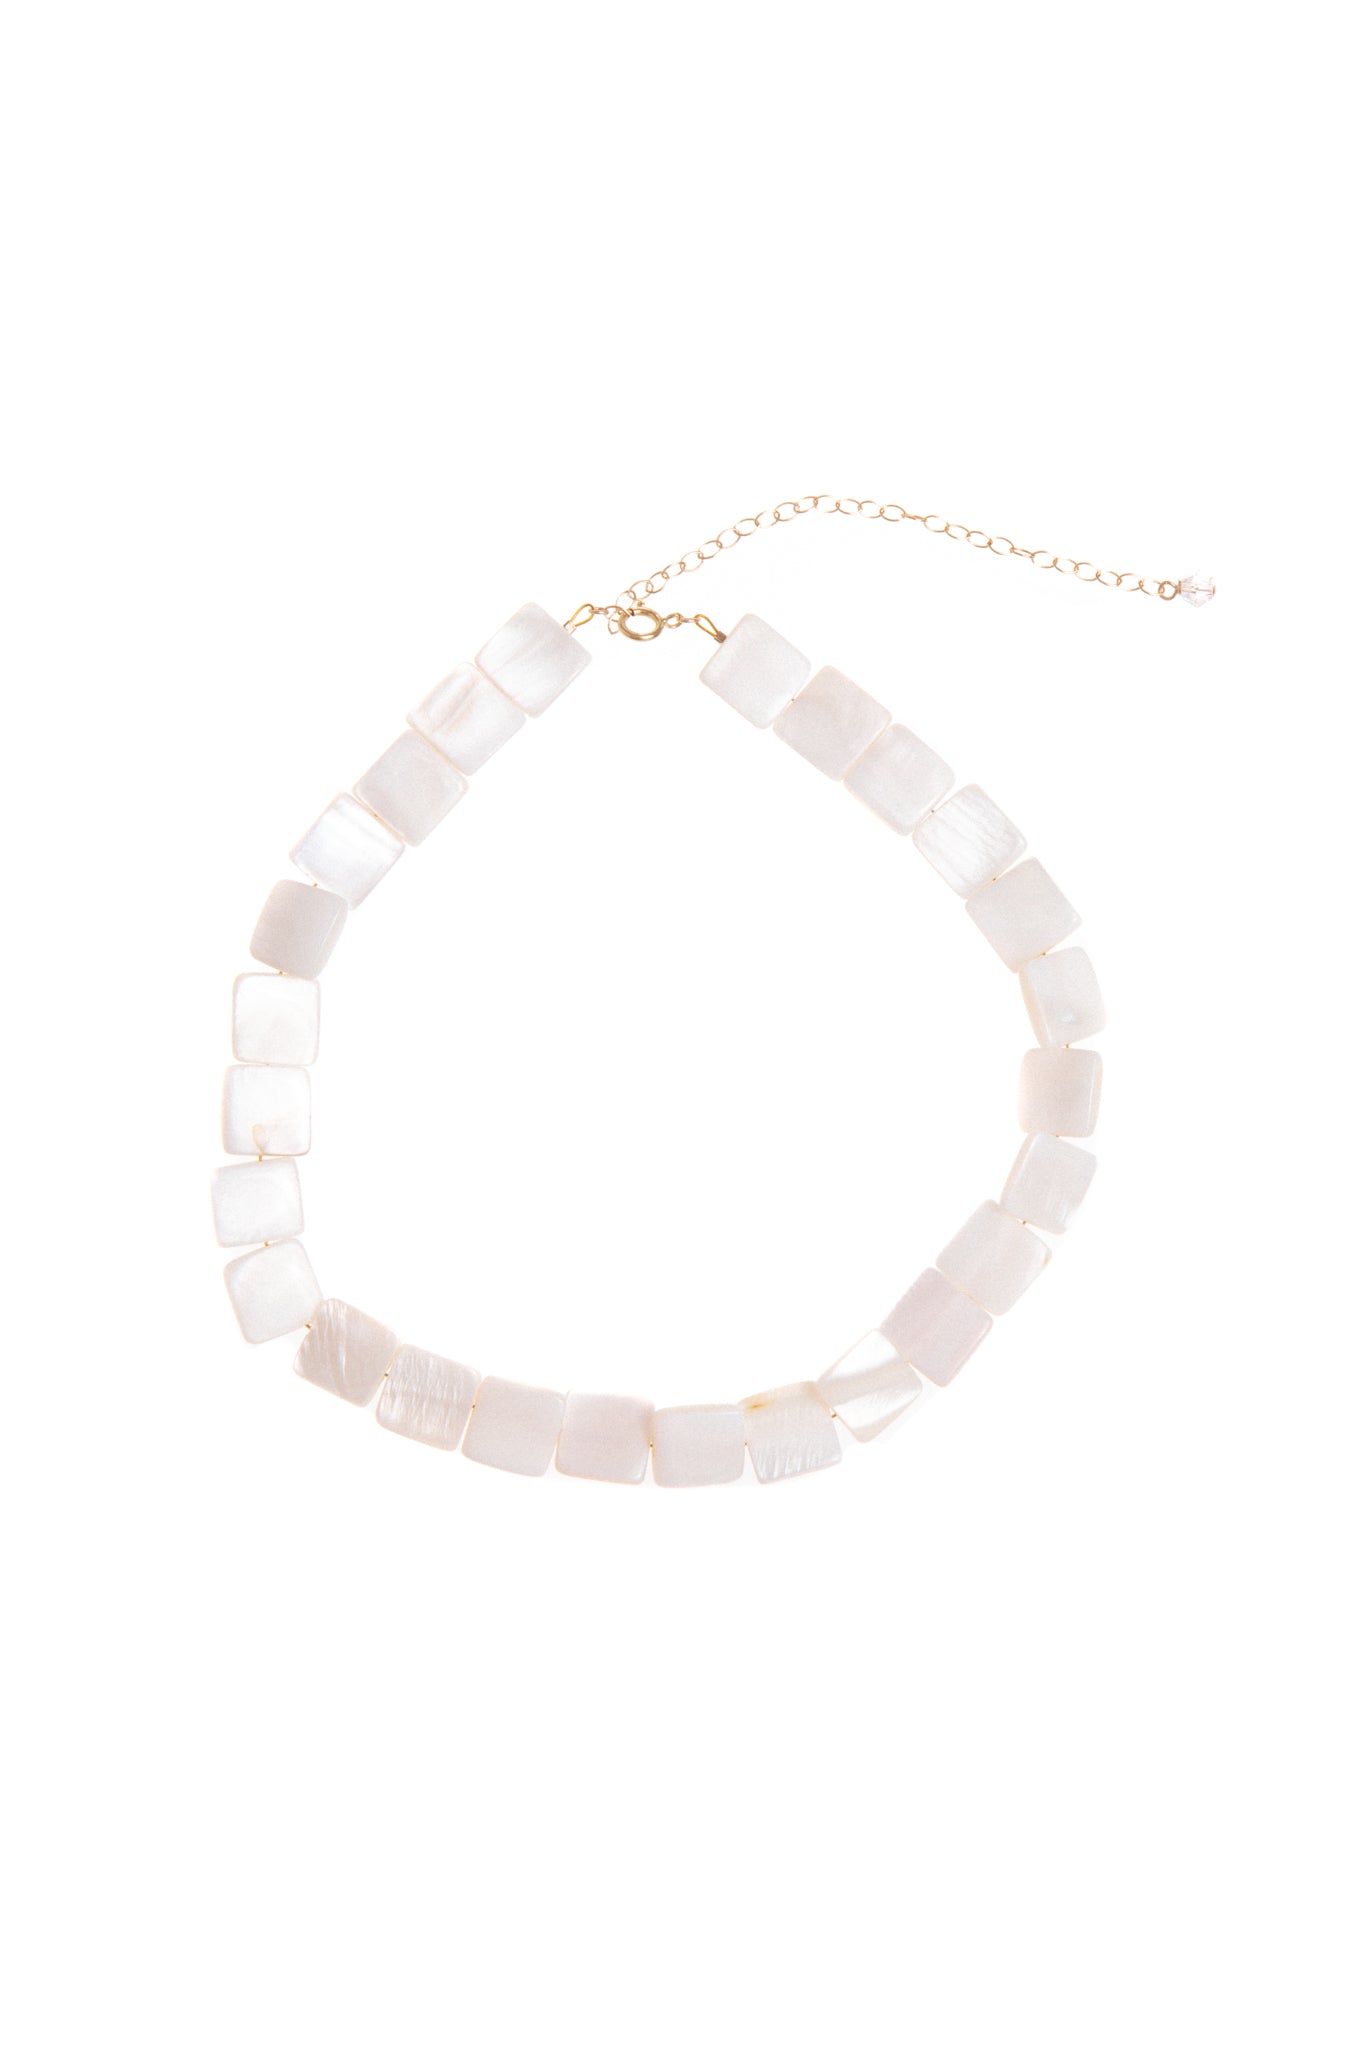 MOTHER OF PEARL CHOKER